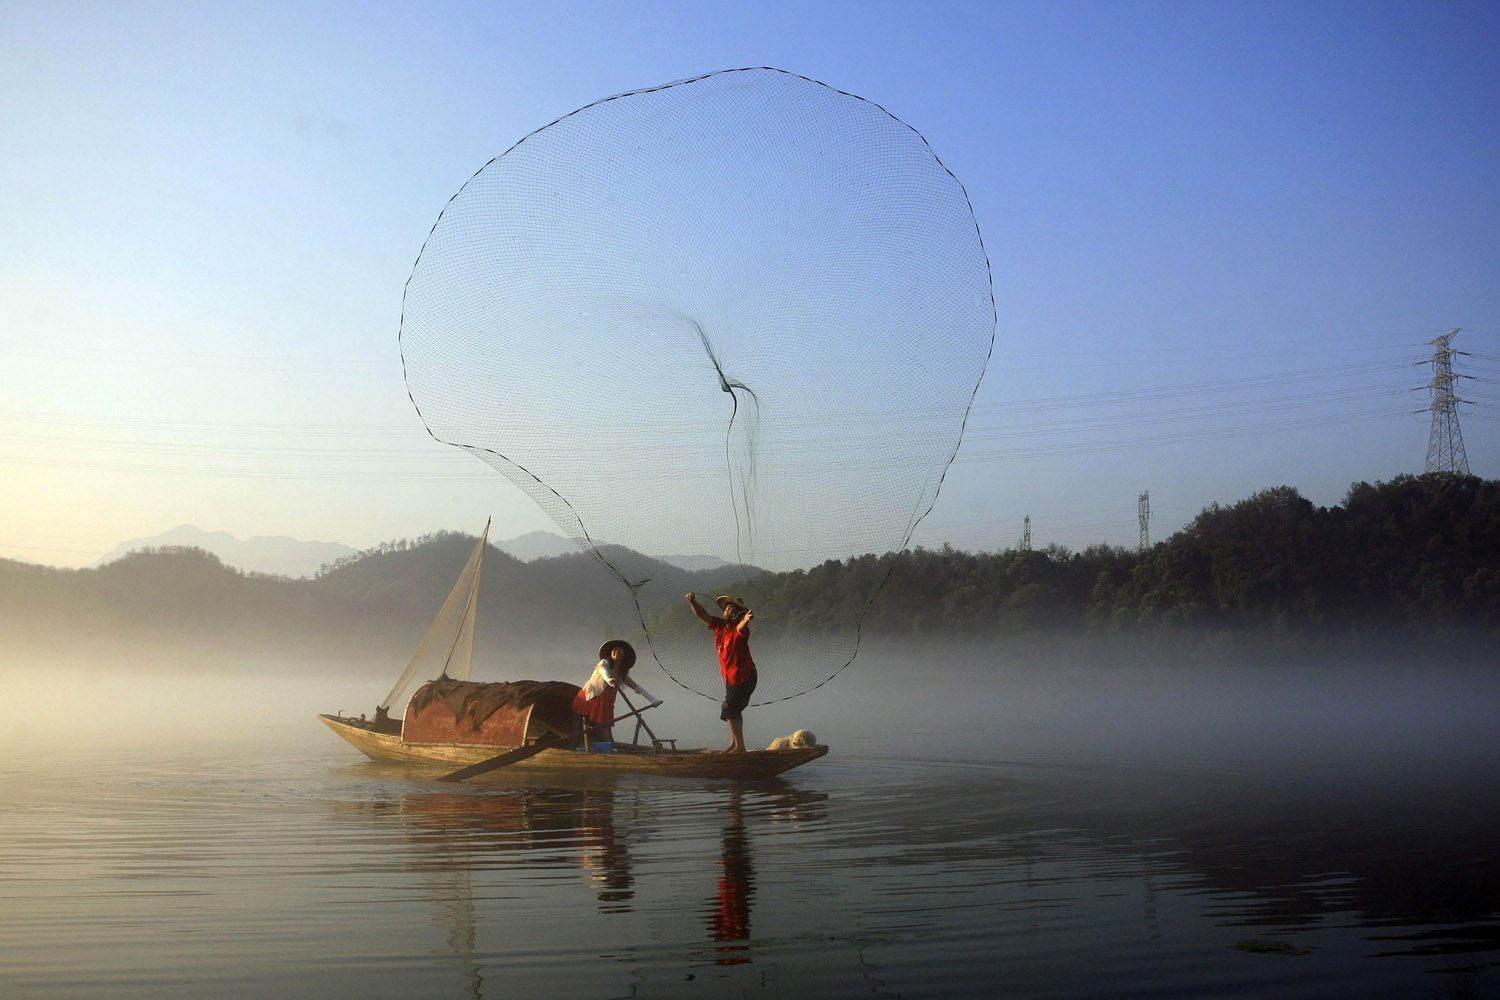 A fisherman casts his net to catch fish on Xin'an River in Jiande